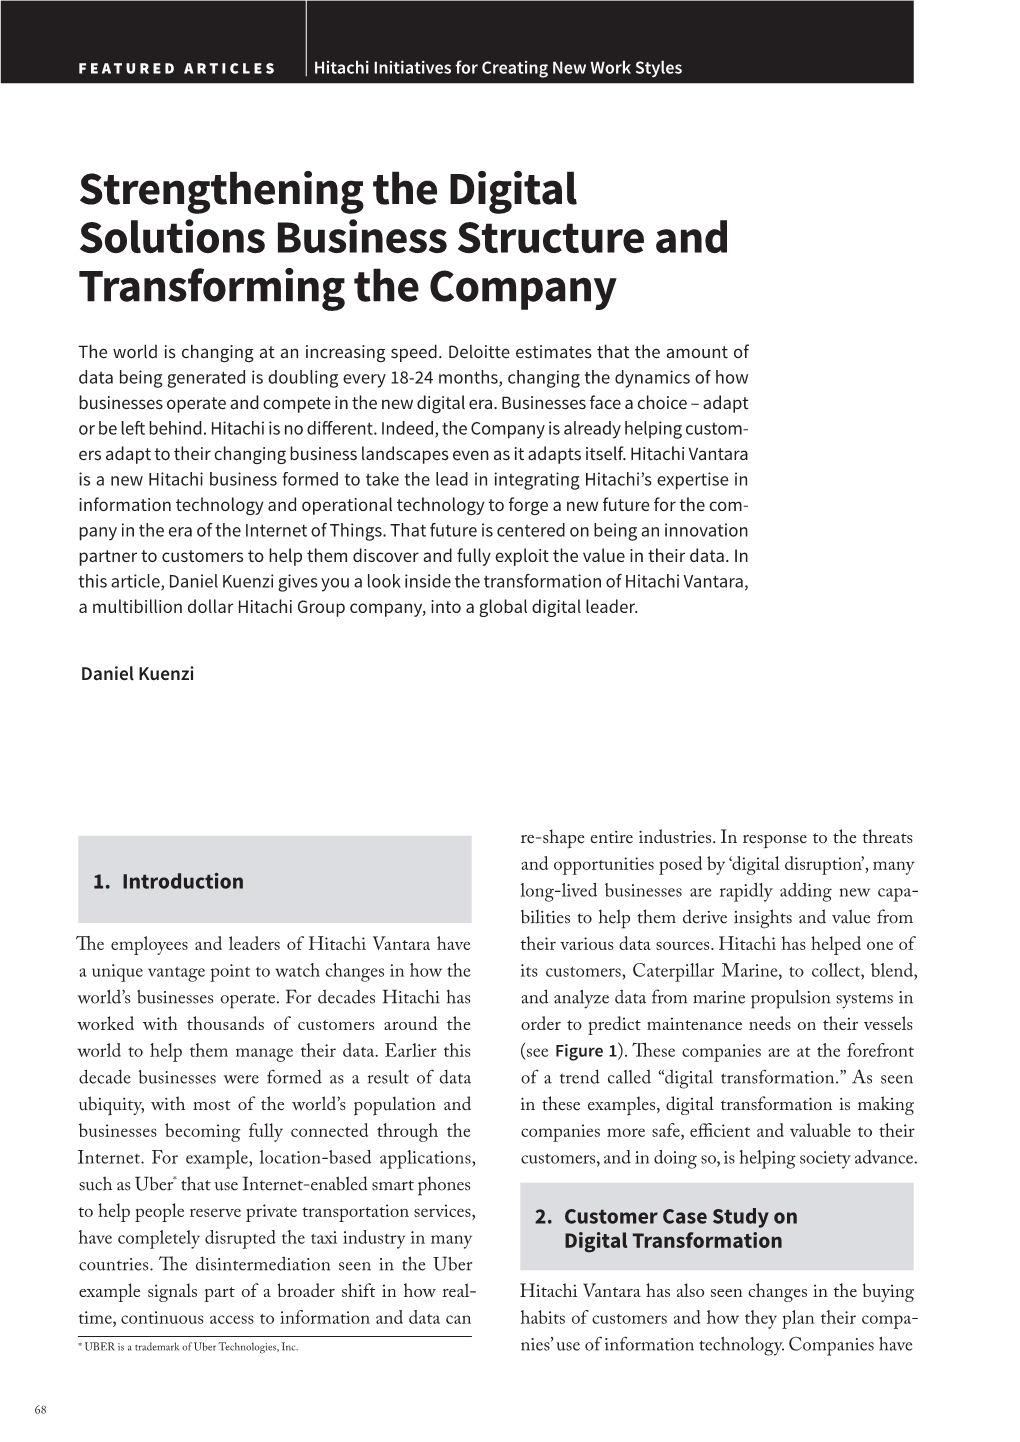 Strengthening the Digital Solutions Business Structure and Transforming the Company